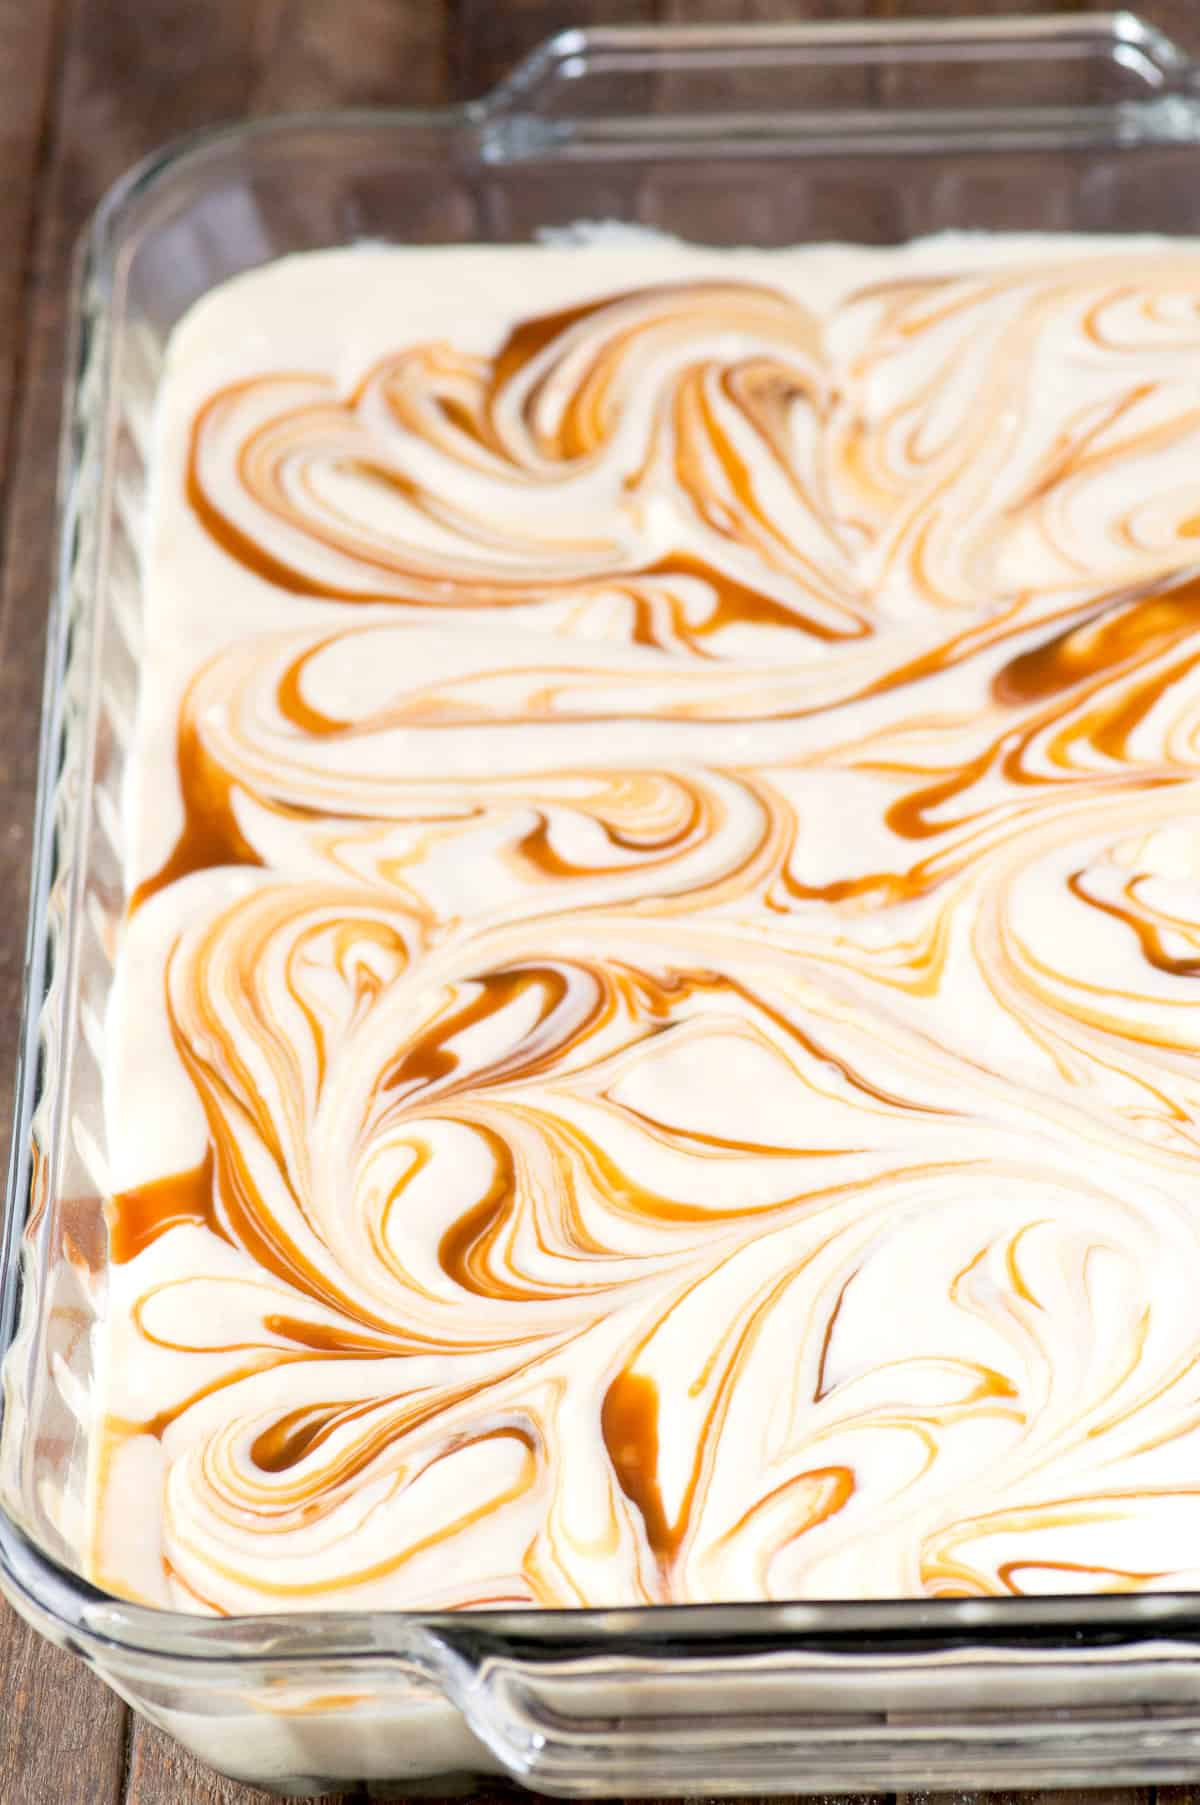 caramel cake with caramel swirled in batter in glass 9x13 inch pan